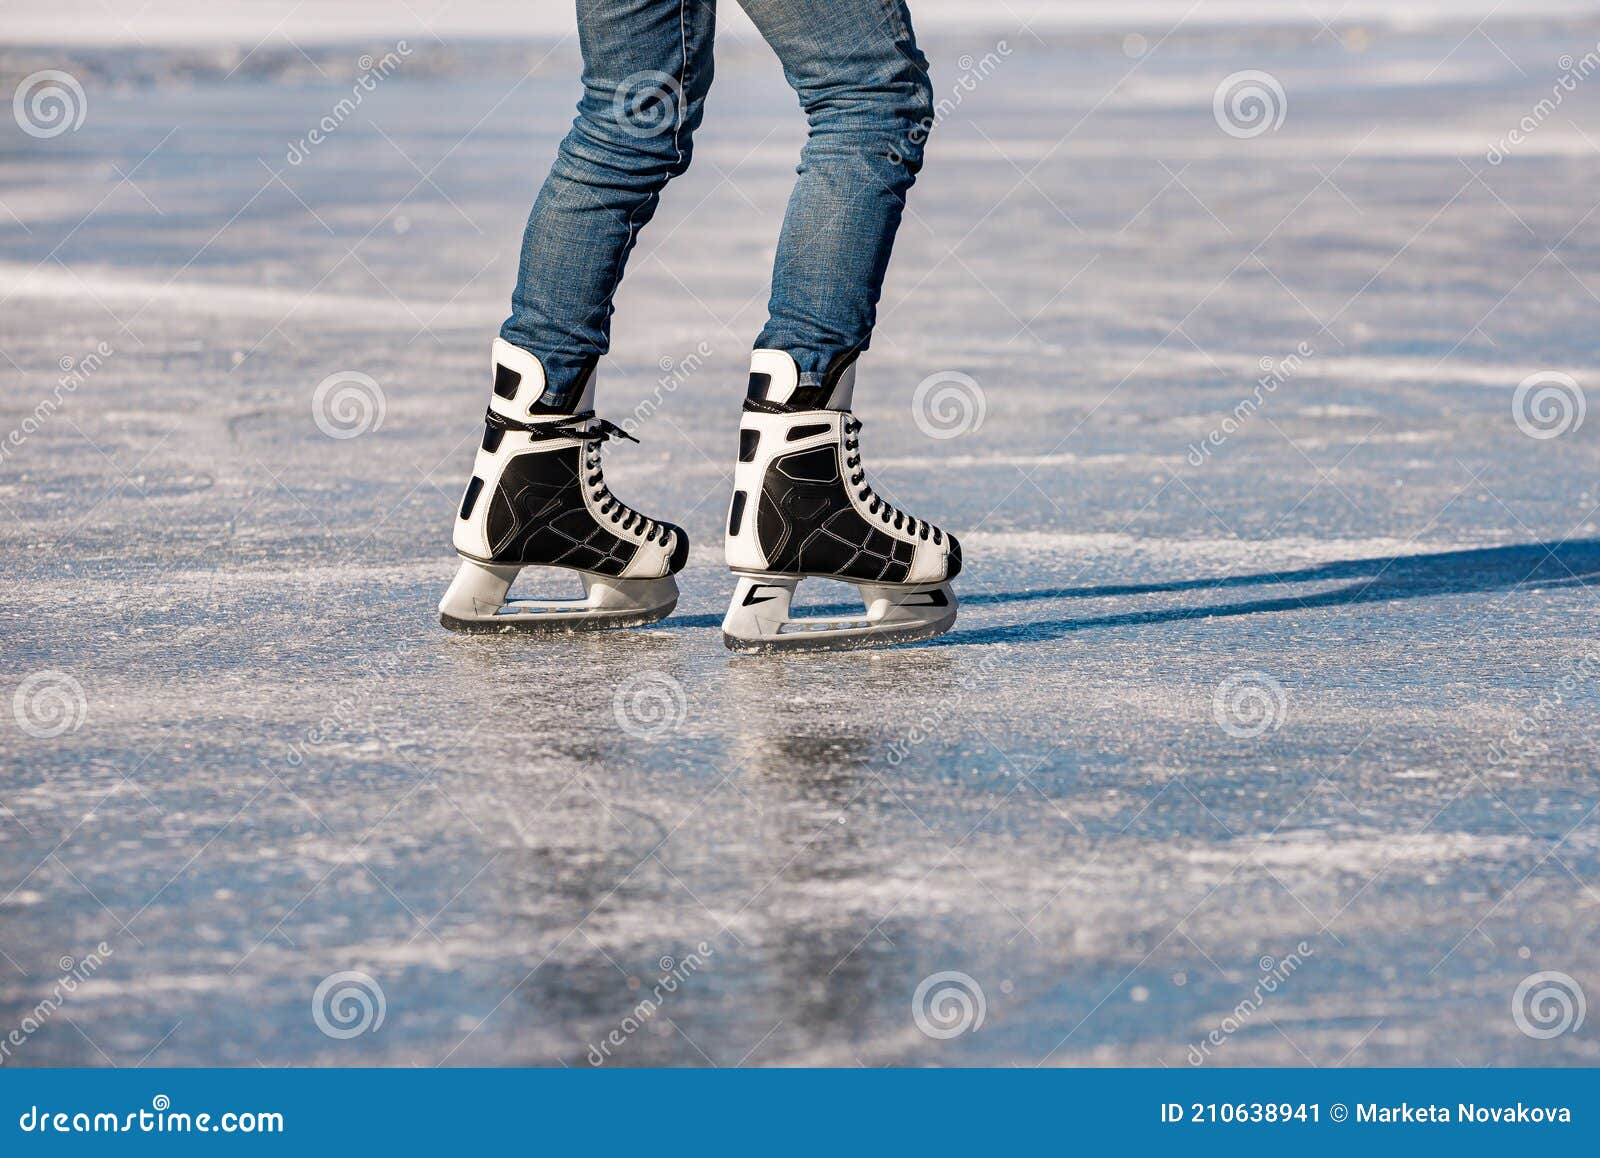 Detail of the Black and White Mens Ice Skates in Action on Ice